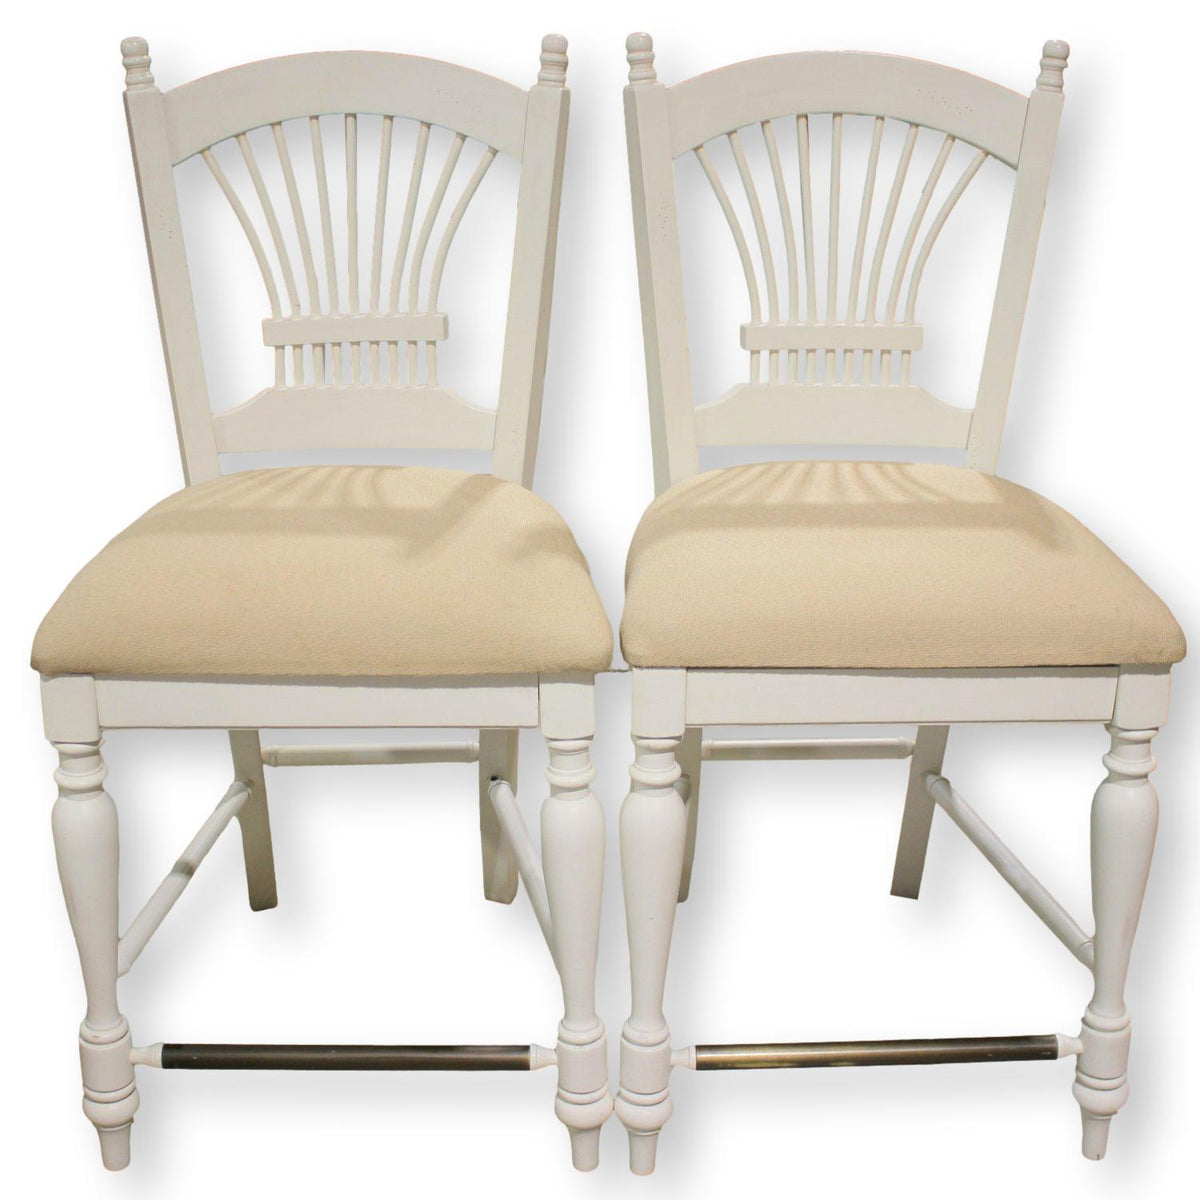 Pair of White Counter Stools w/Brass Foot Rests